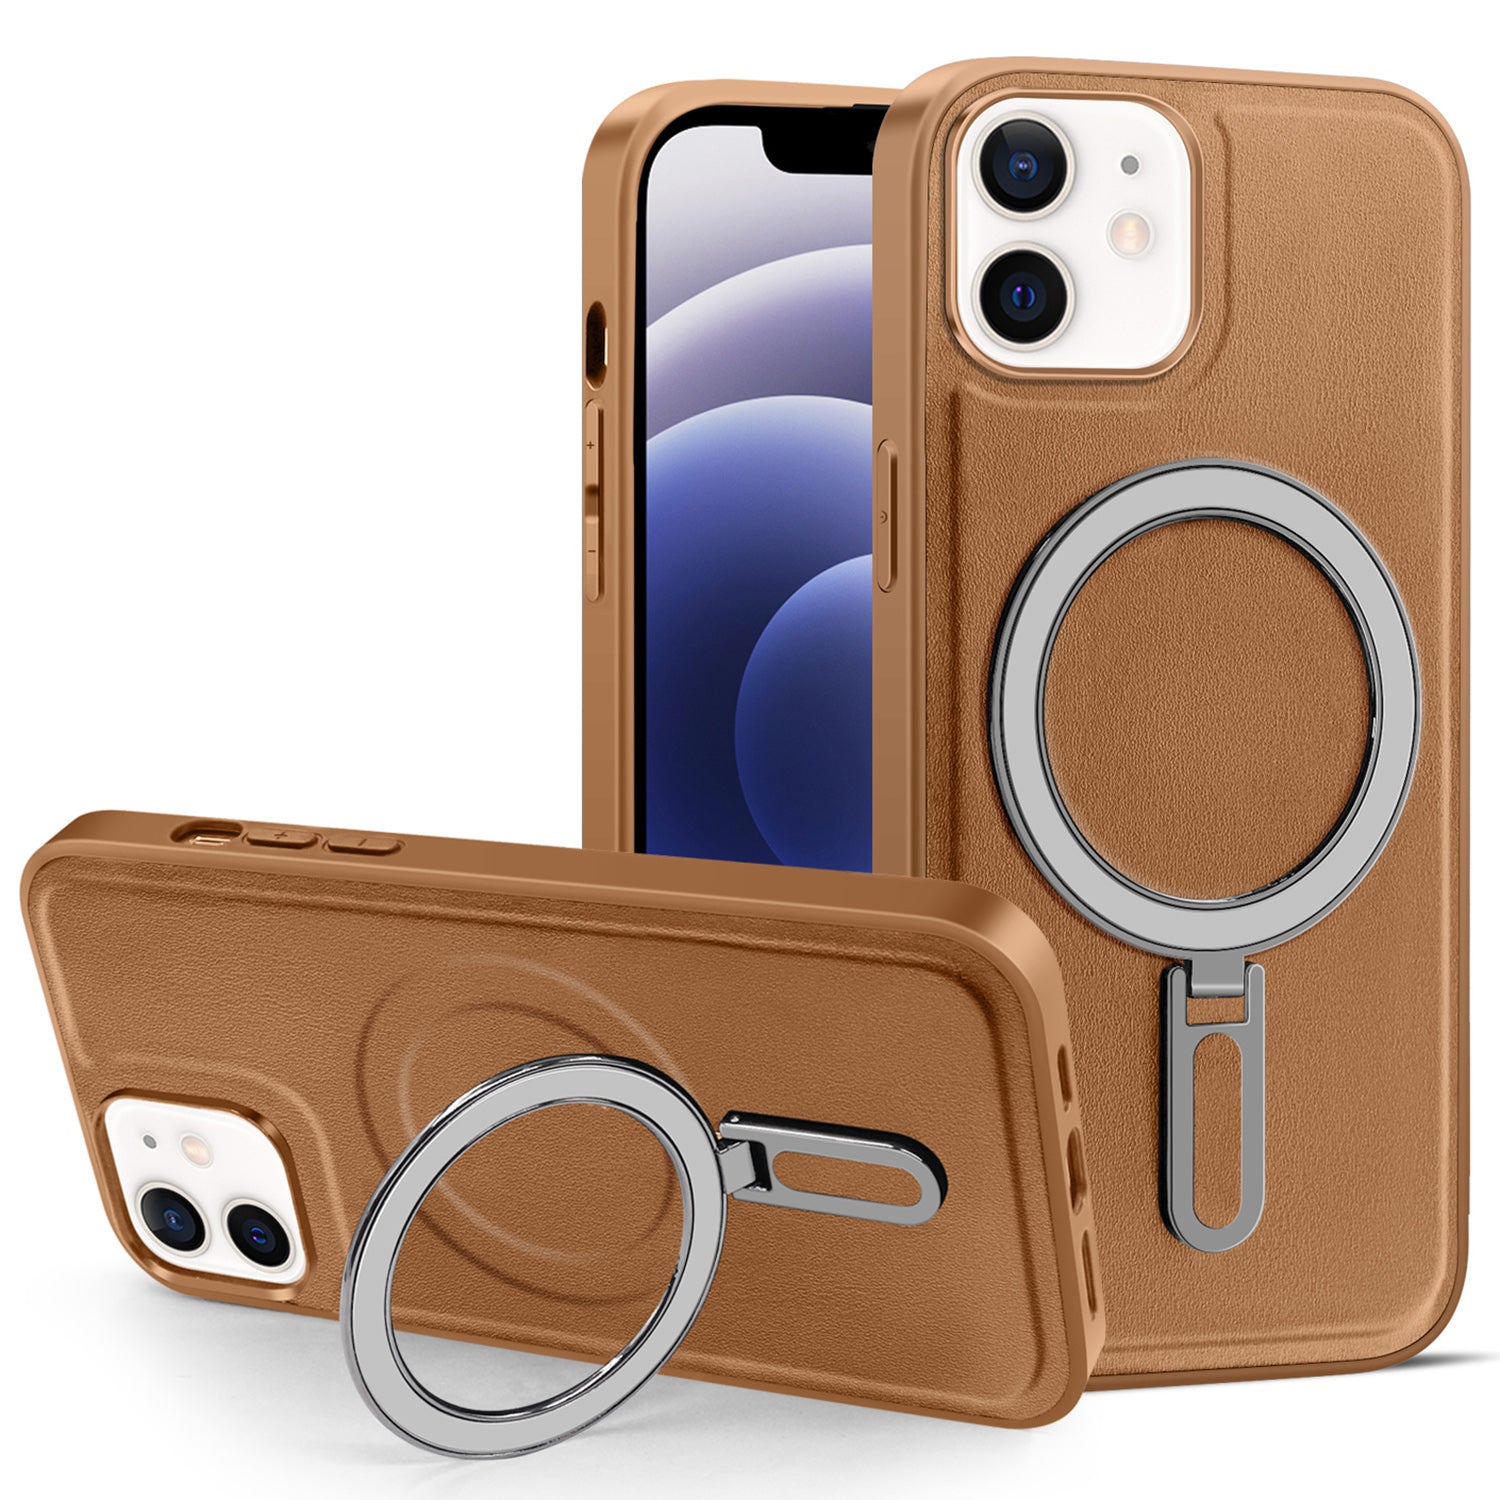 Uniqkart for iPhone 12 / 12 Pro 6.1 inch Phone Case Kickstand Design PU Leather Coated PC+TPU Magnetic Cover - Brown